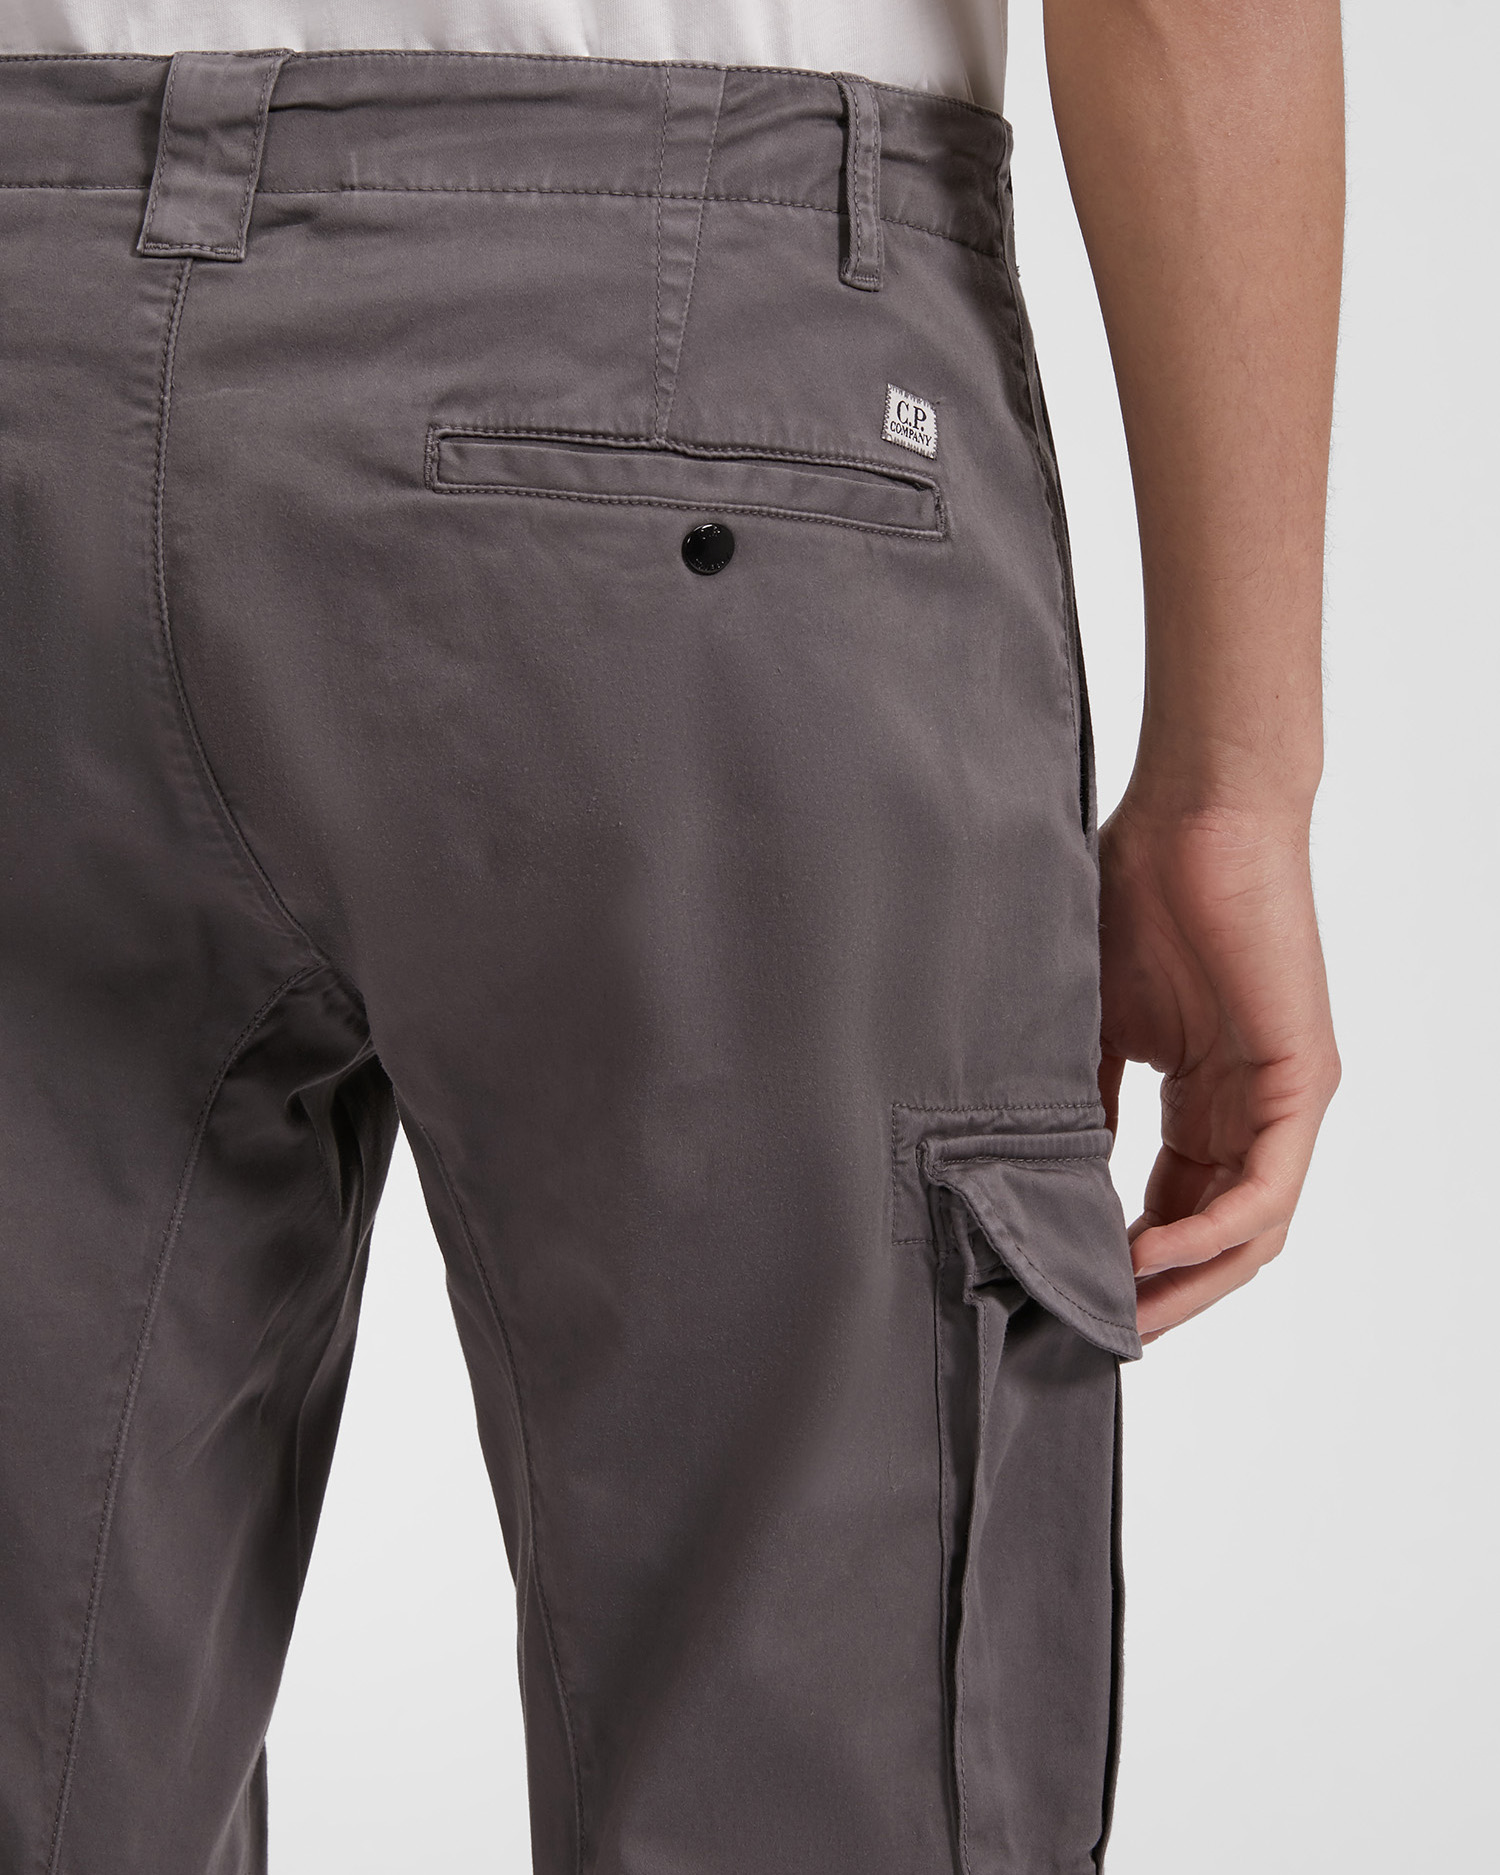 Stretch Sateen Garment Dyed Cargo Pants | C.P. Company Online Store